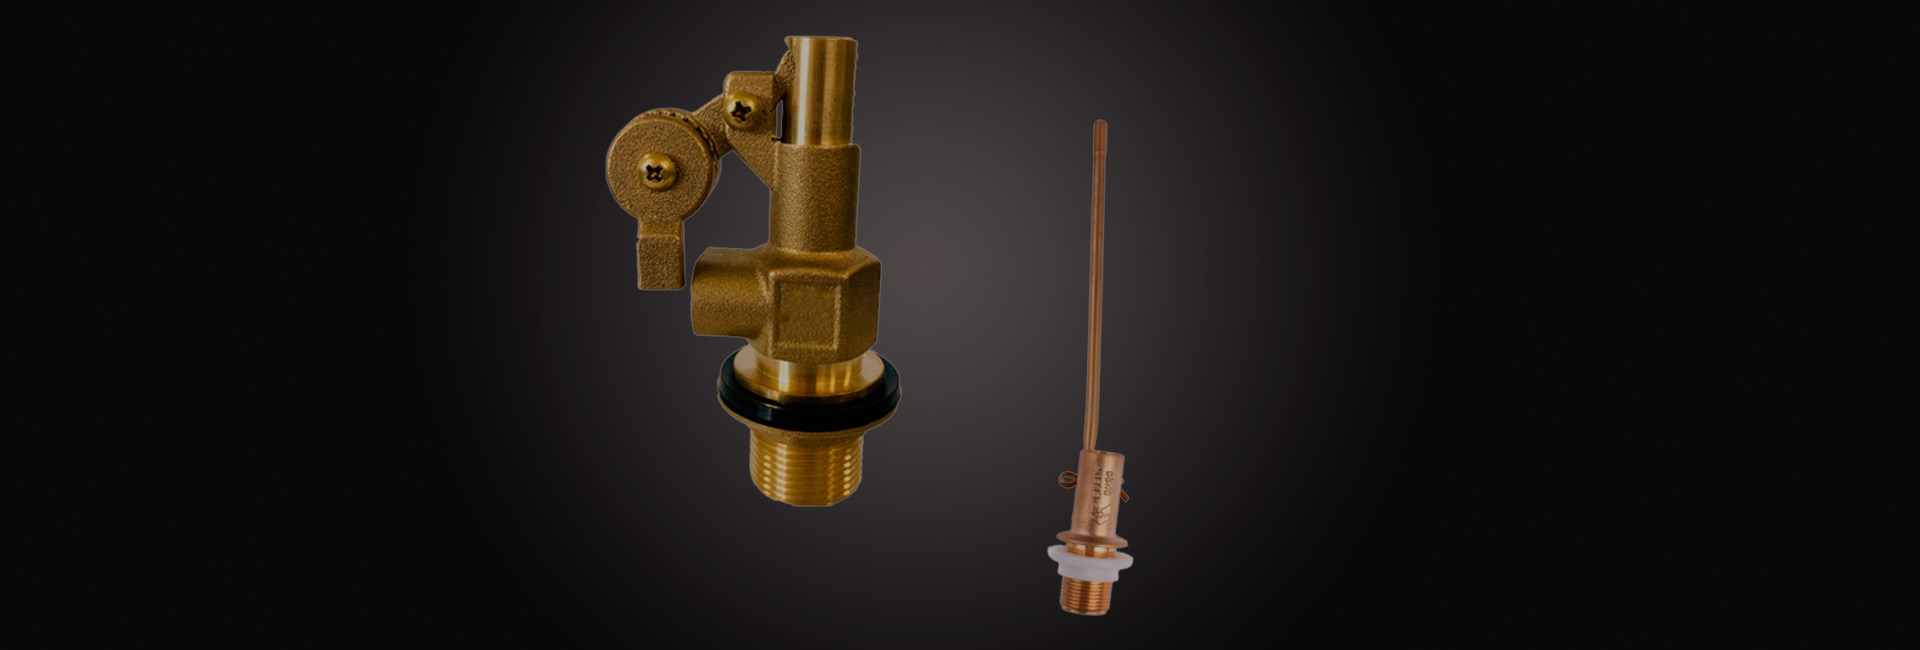 The Advantages of Using Brass Float Ball Valves in Plumbing Systems